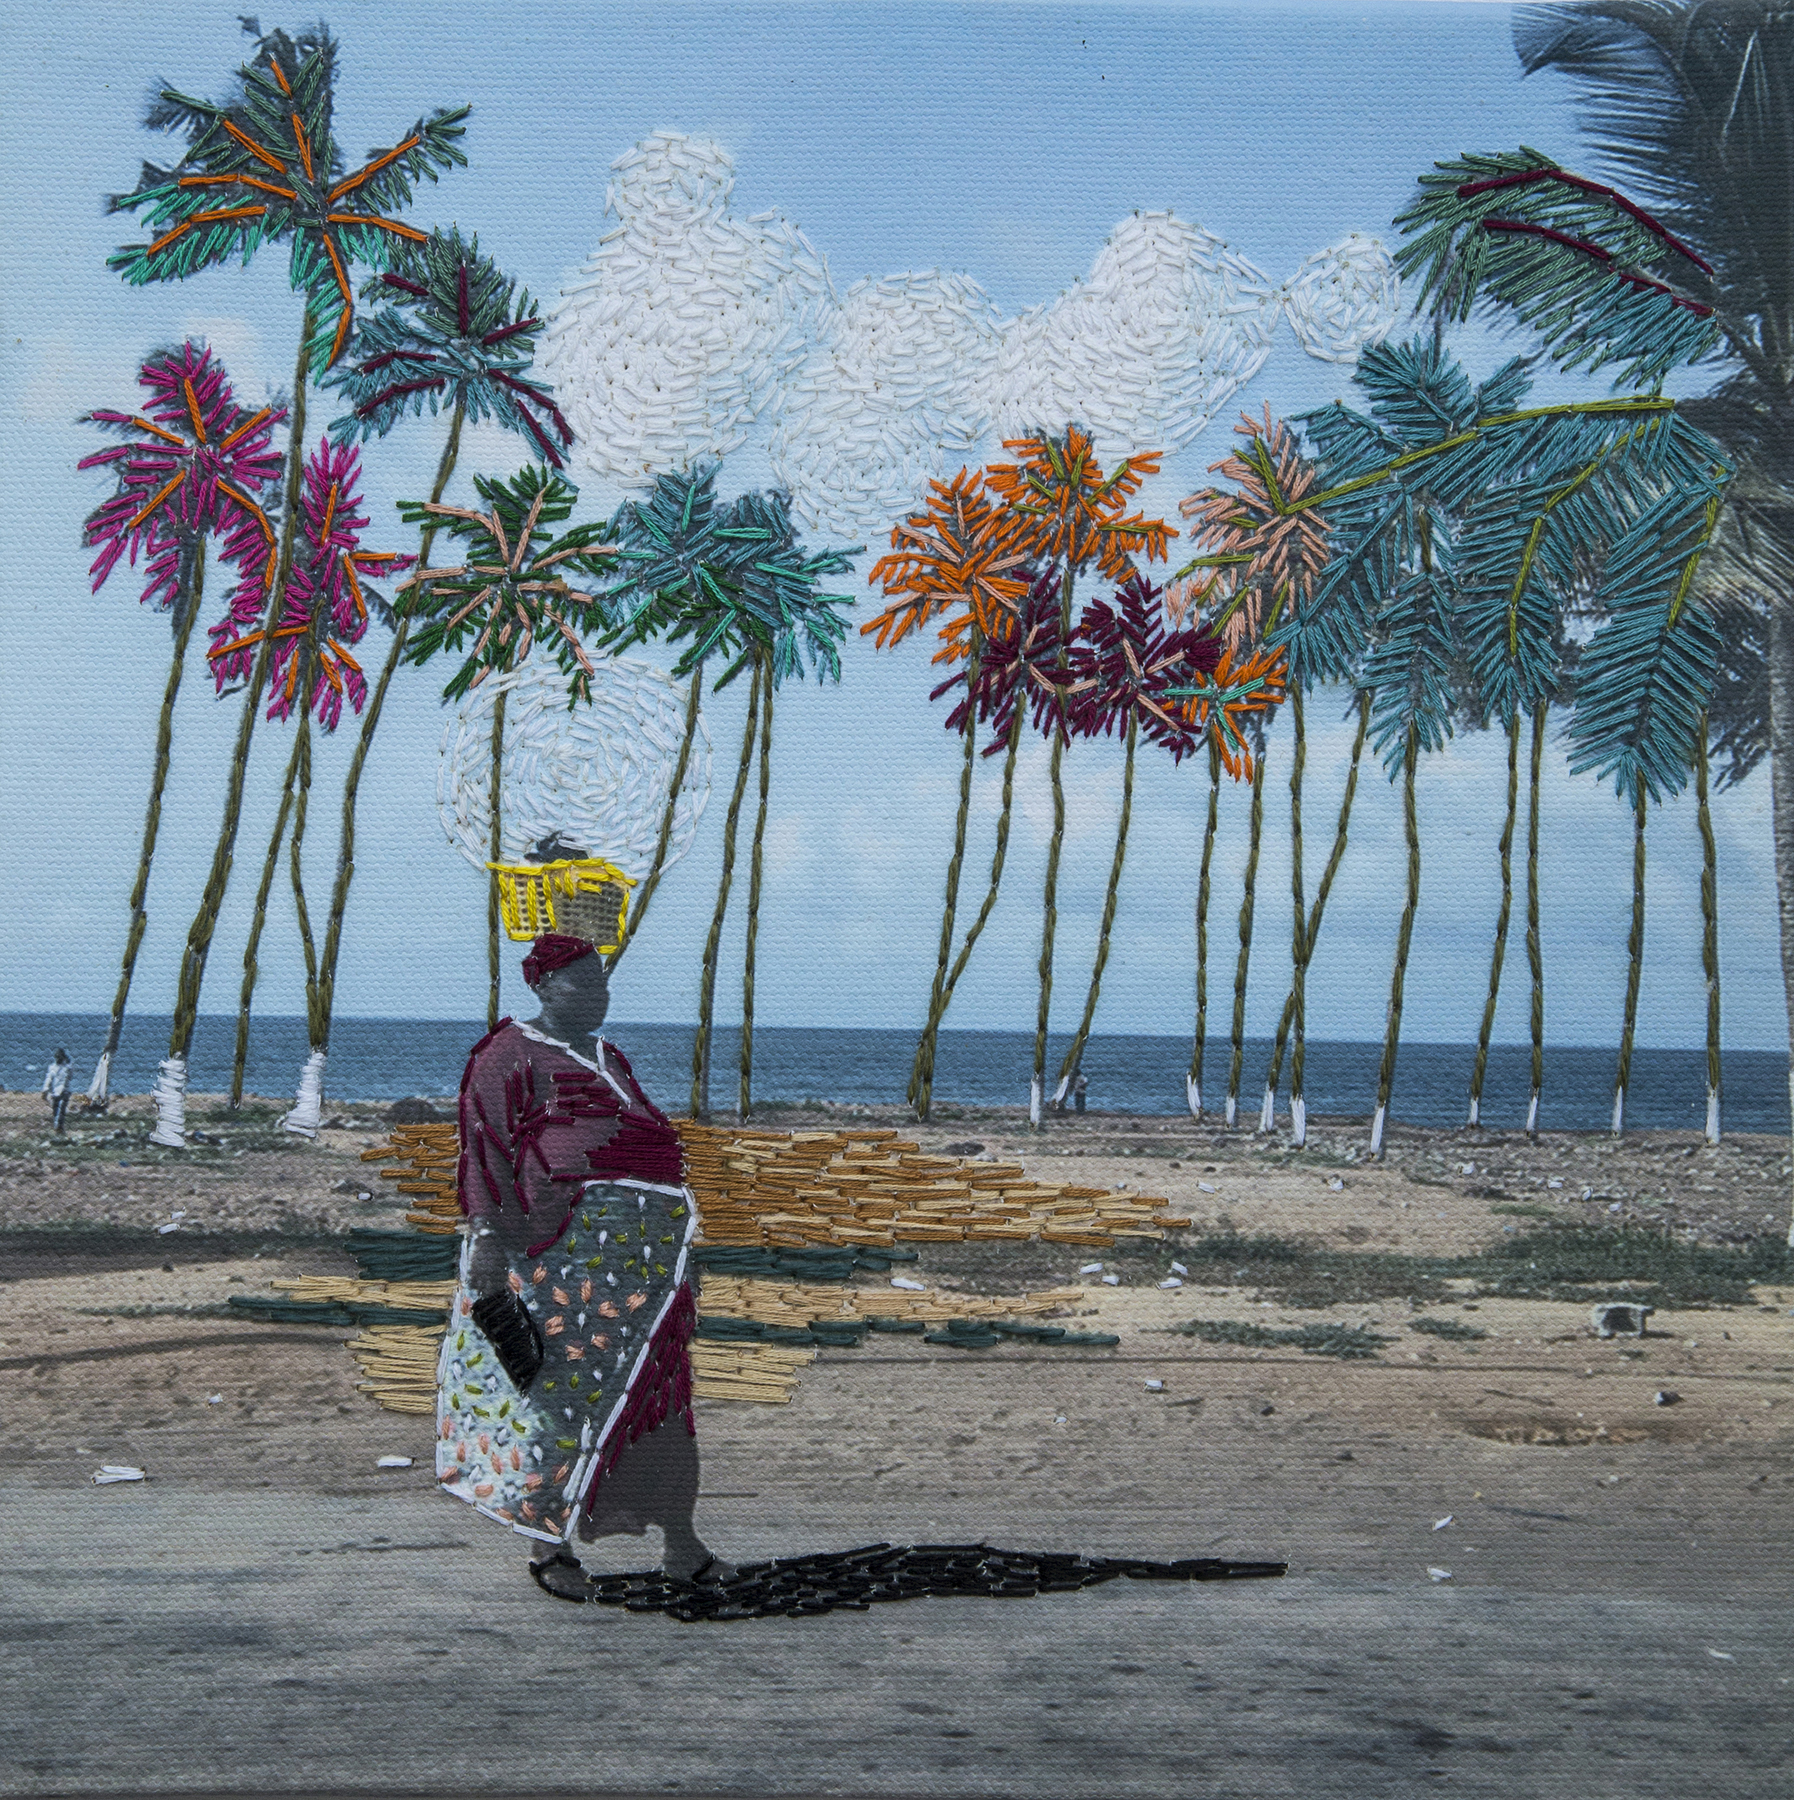 Embroidered photograph of woman walking by palm trees.